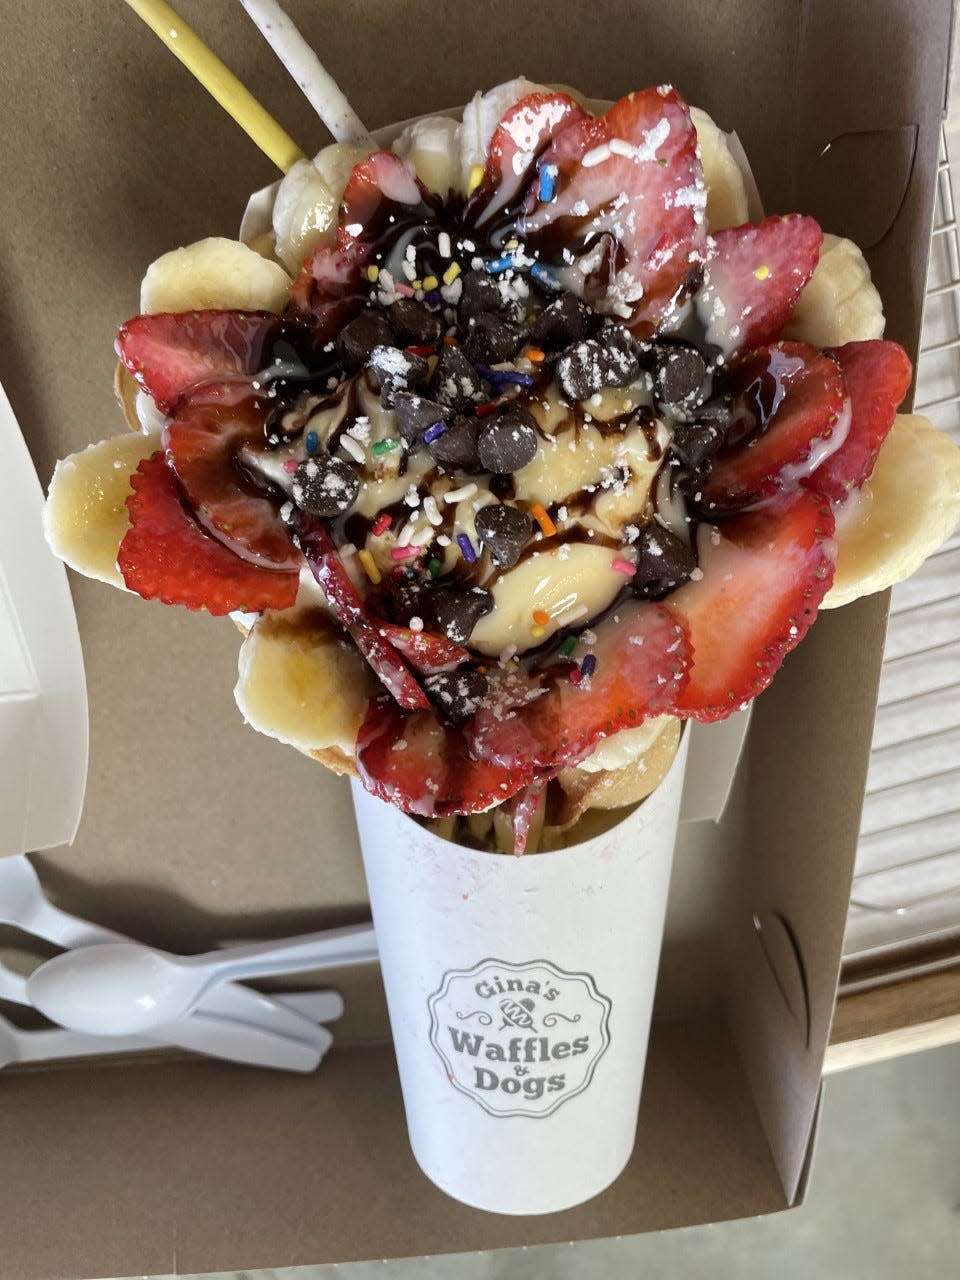 Bubble Waffle filled with ice cream, bananas and strawberries and topped with chocolate sauce, sprinkles and chocolate chips.